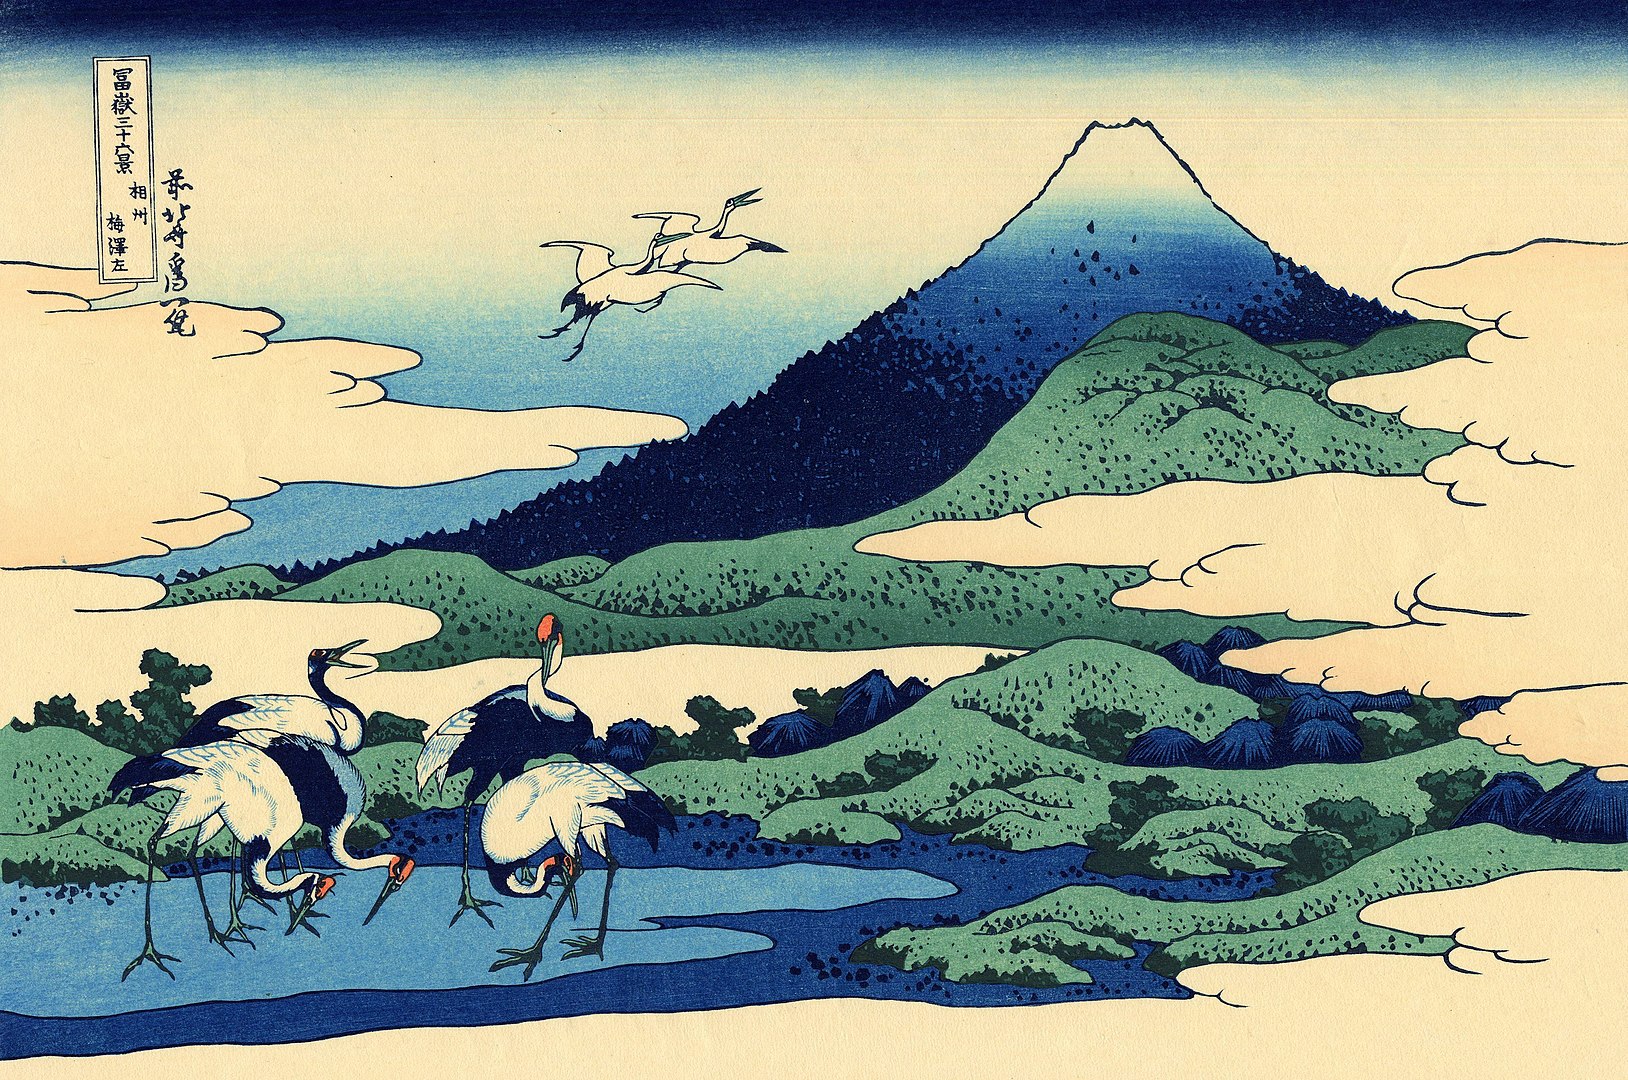 An illustration of a scene of mountains and flightless birds.